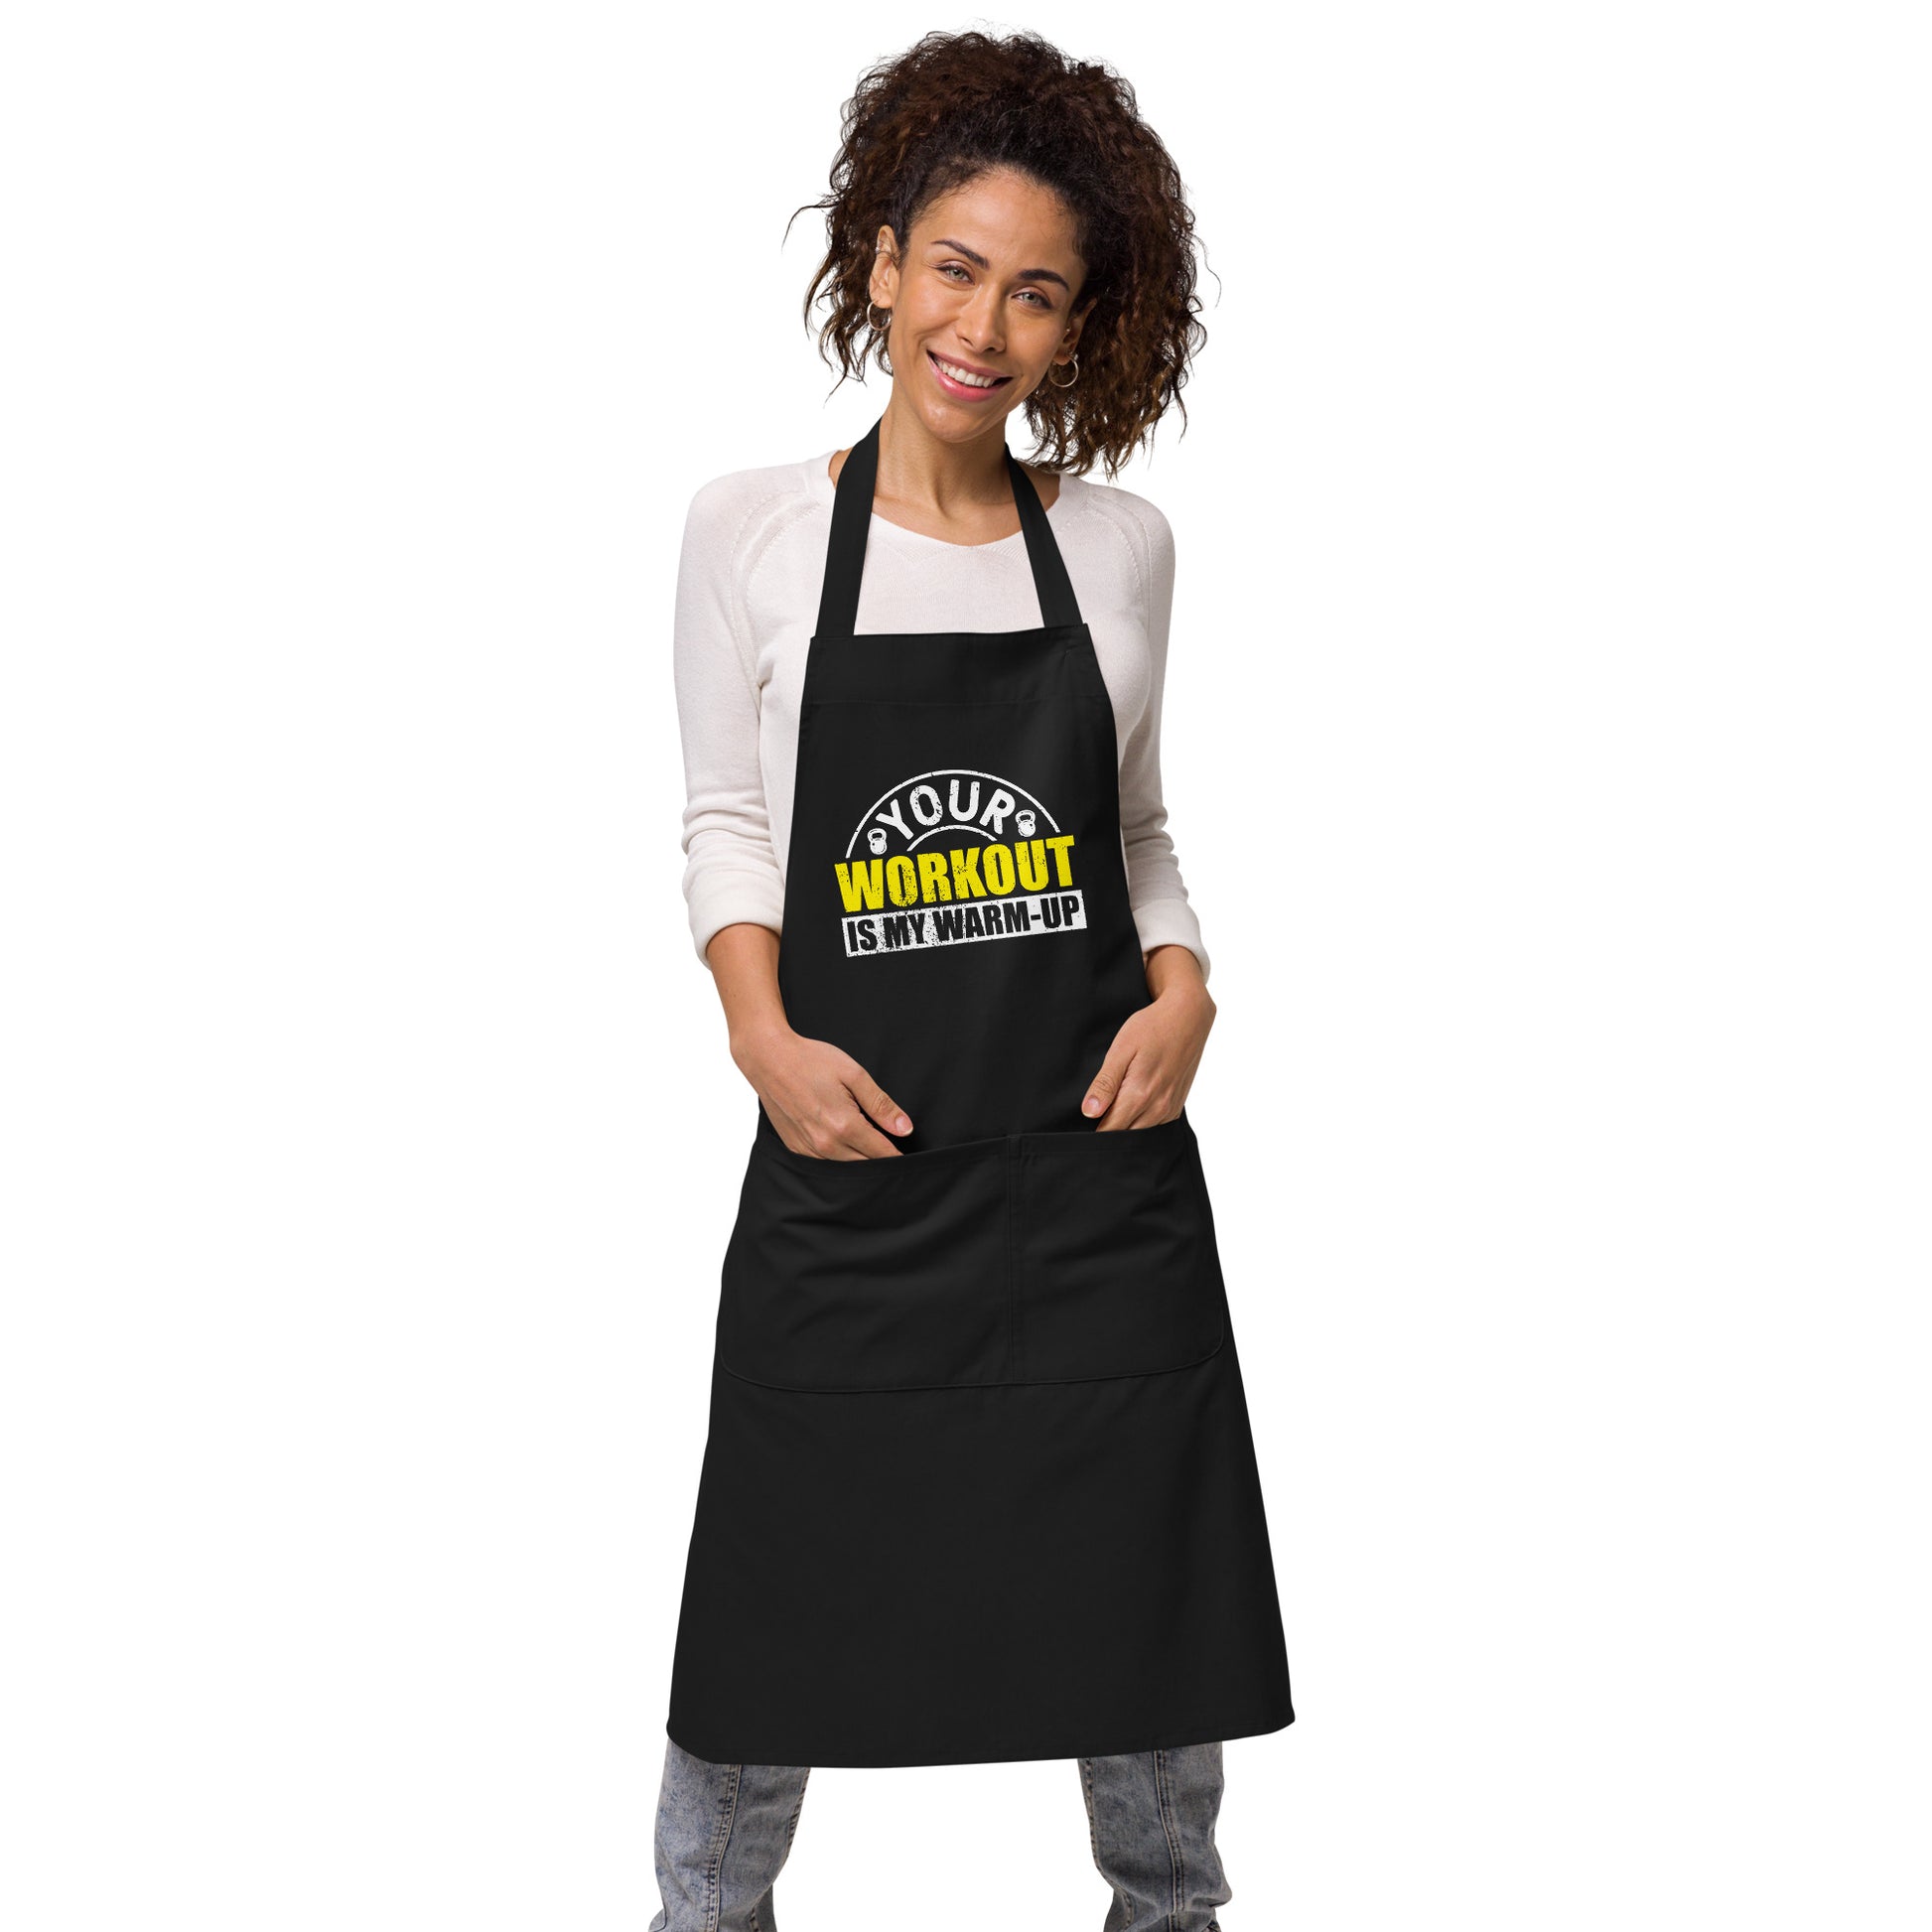 Your Workout is My Warm-Up Organic cotton apron